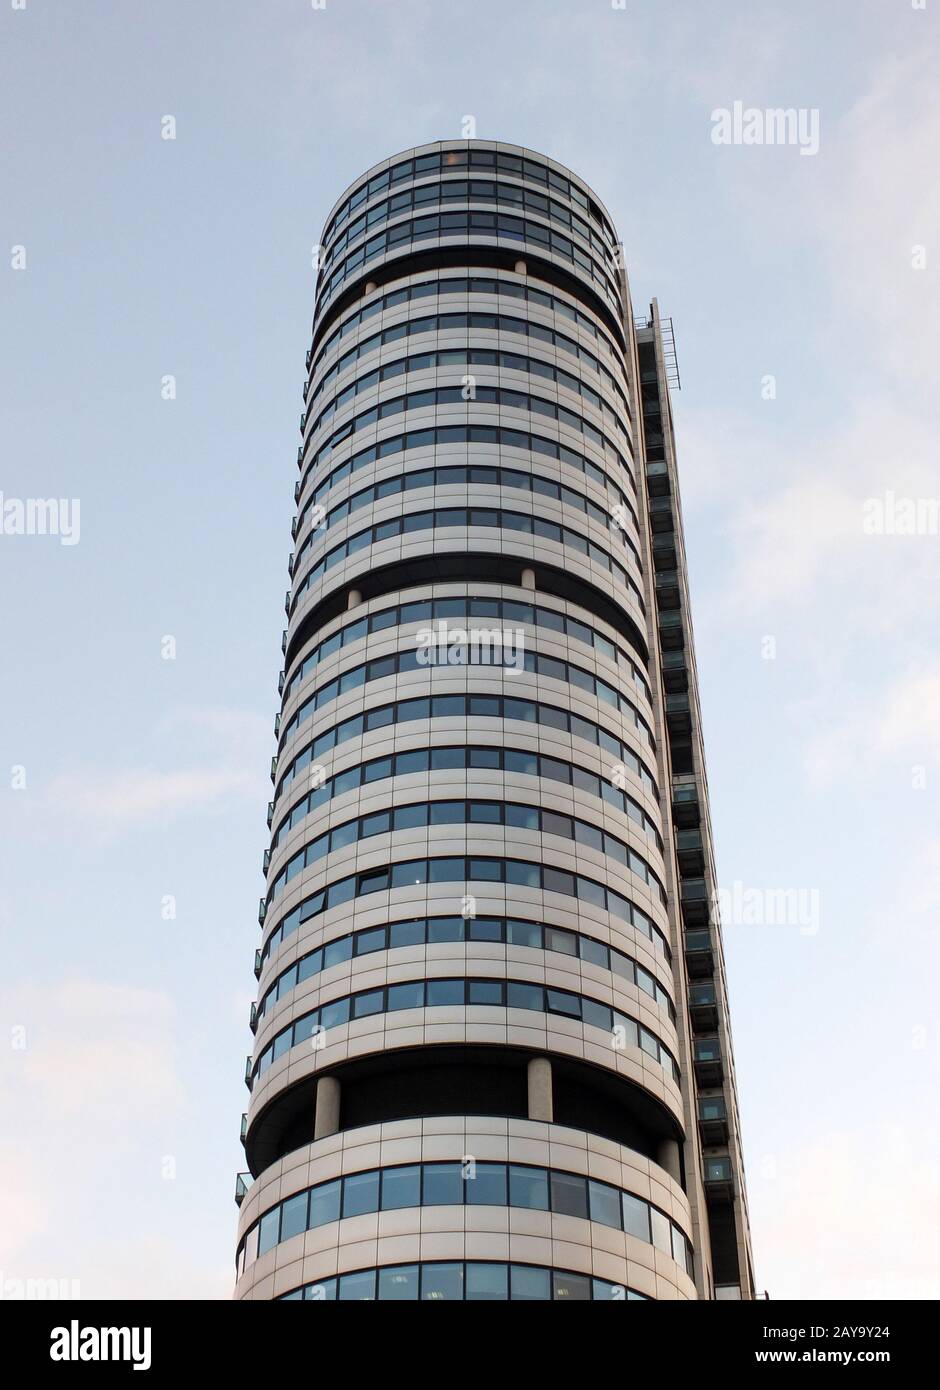 vertical view of Bridgewater Place building the tallest structure in leeds against a blue cloudy sky Stock Photo